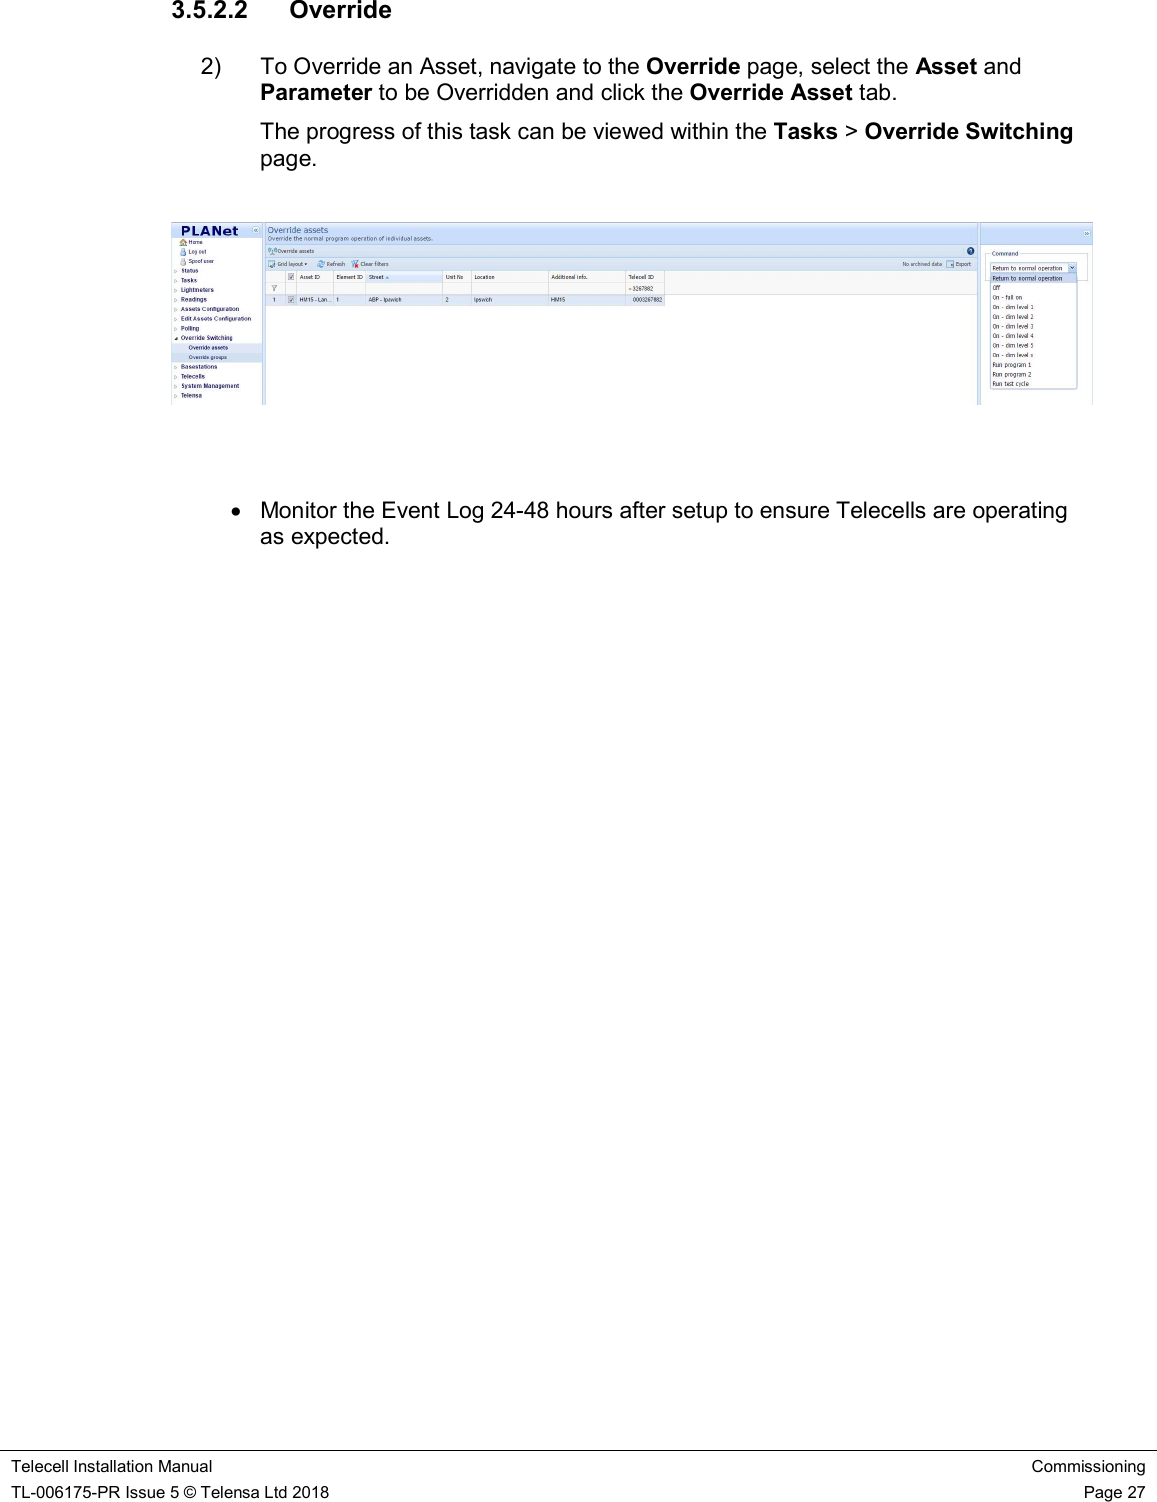    Telecell Installation Manual Commissioning TL-006175-PR Issue 5 © Telensa Ltd 2018    Page 27  3.5.2.2  Override 2)  To Override an Asset, navigate to the Override page, select the Asset and Parameter to be Overridden and click the Override Asset tab.  The progress of this task can be viewed within the Tasks &gt; Override Switching page.       Monitor the Event Log 24-48 hours after setup to ensure Telecells are operating as expected.       